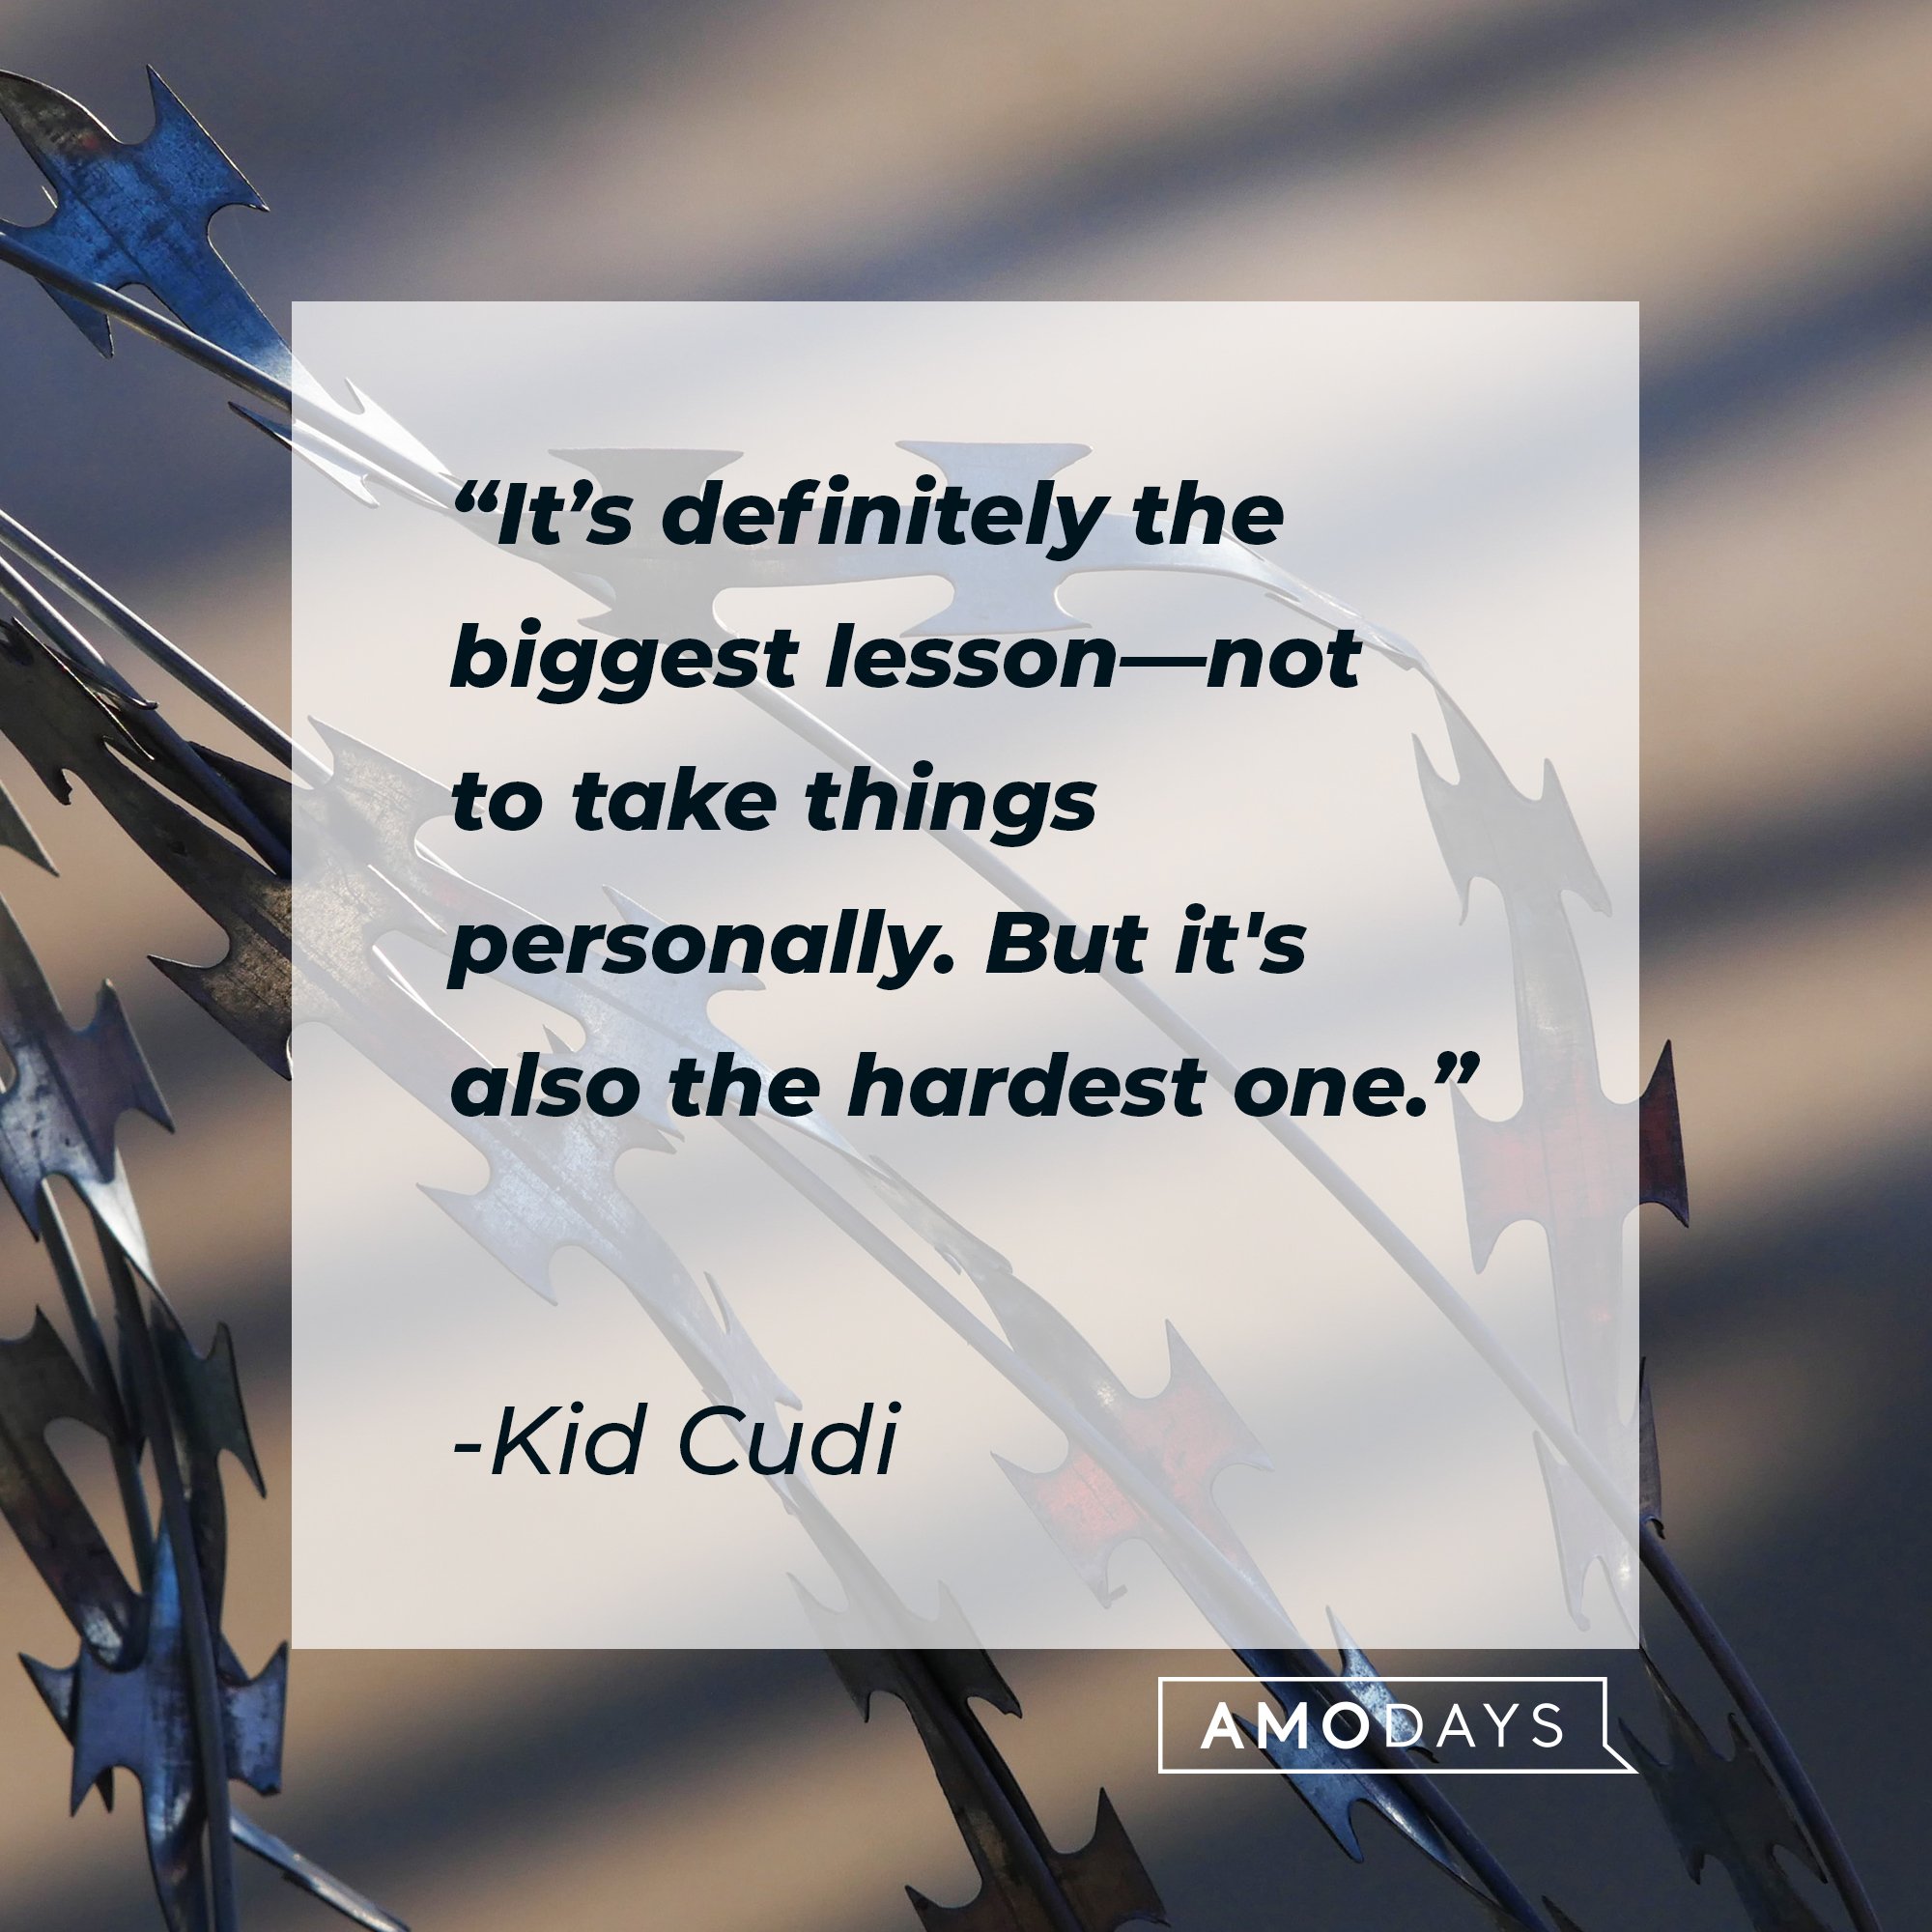 Kid Cudi’s quote: “It’s definitely the biggest lesson—not to take things personally. But it's also the hardest one." | Image: AmoDays 